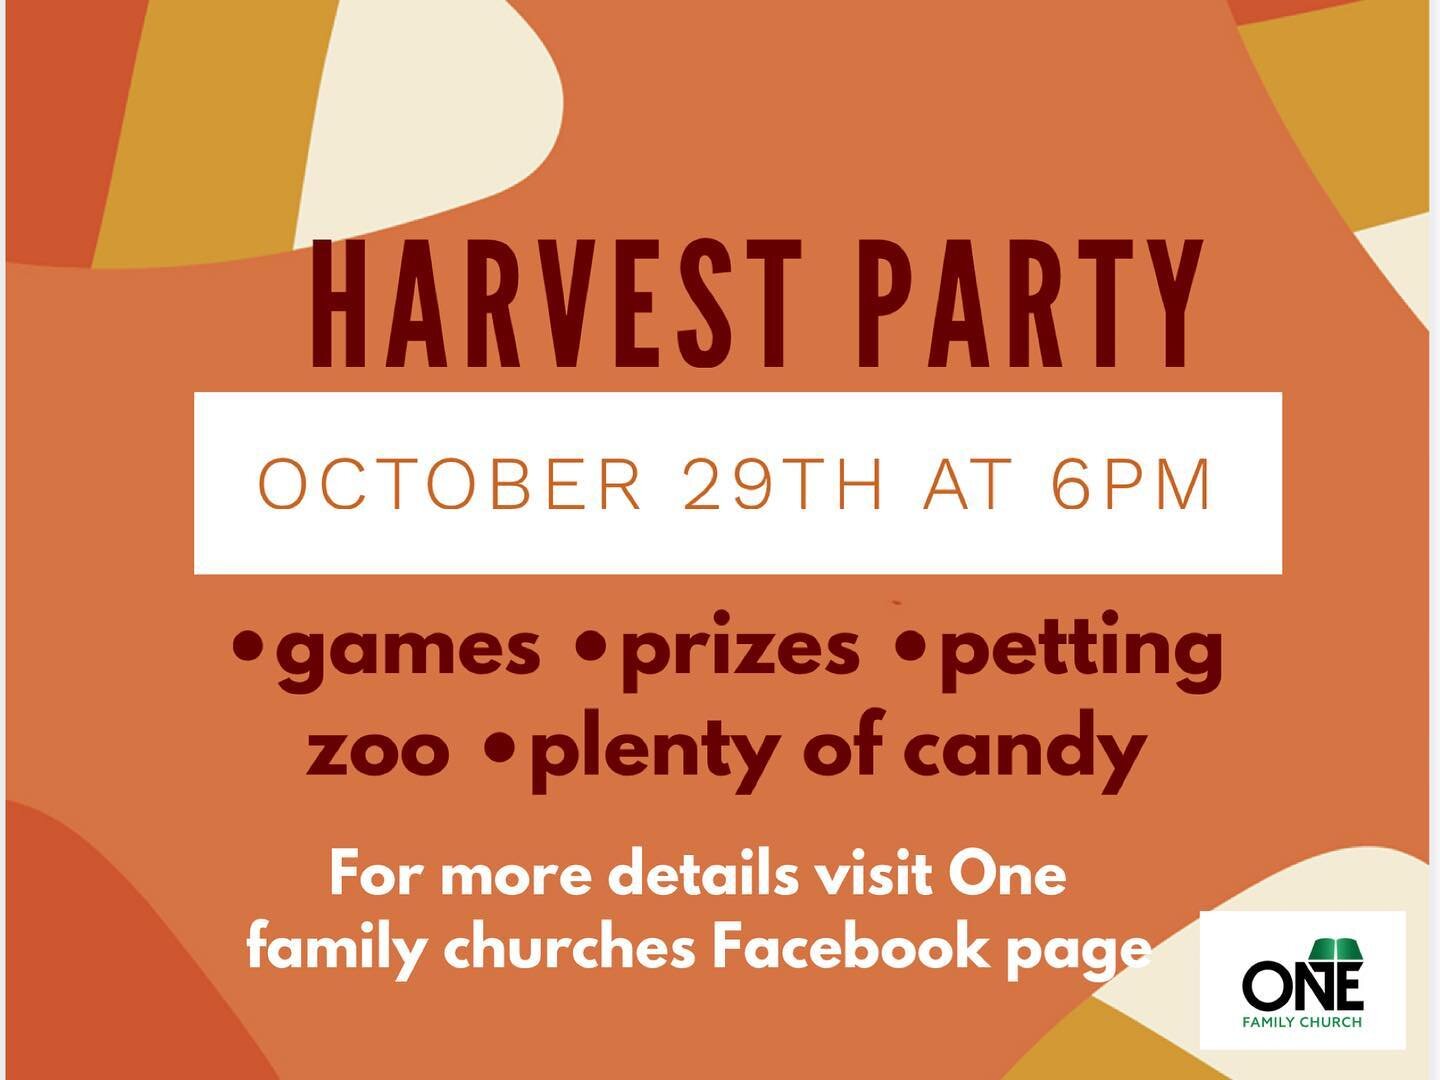 Join us for a fall harvest party. There will be&nbsp;&nbsp;games, door prizes, a petting zoo, and plenty of candy! You don&rsquo;t want to miss this!